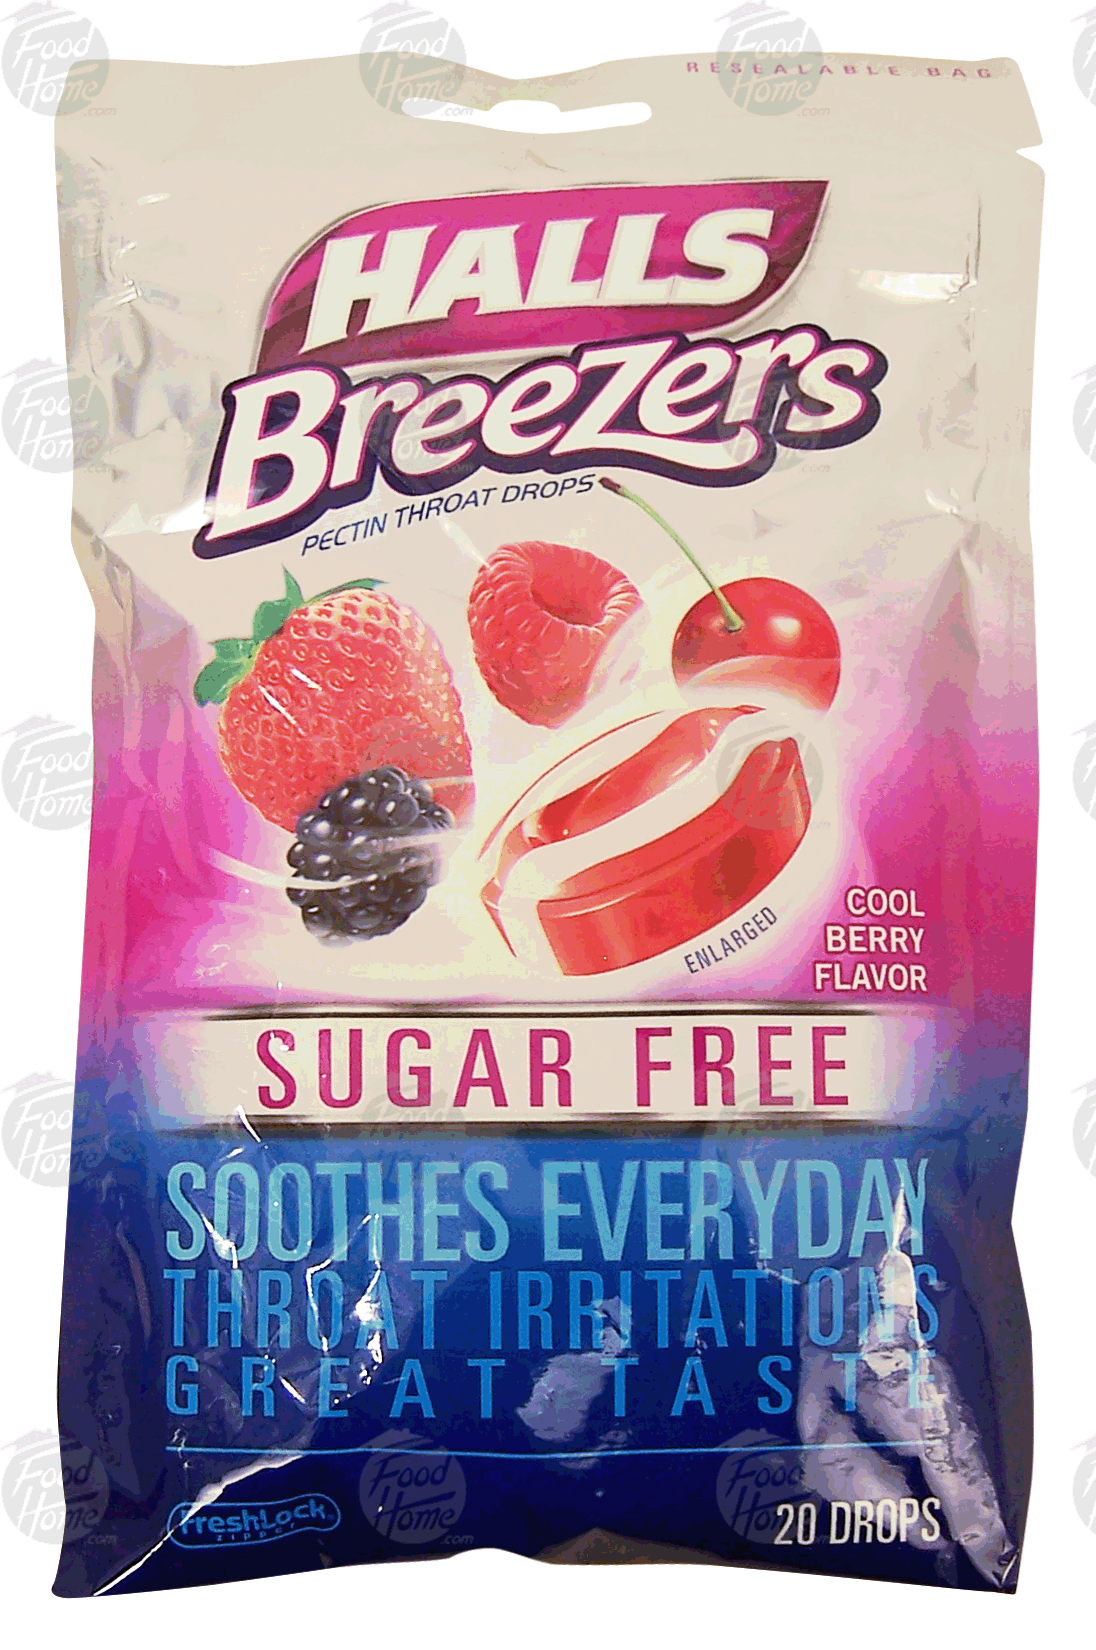 Halls Breezers pectin throat drops, cool berry flavor, sugar-free Full-Size Picture